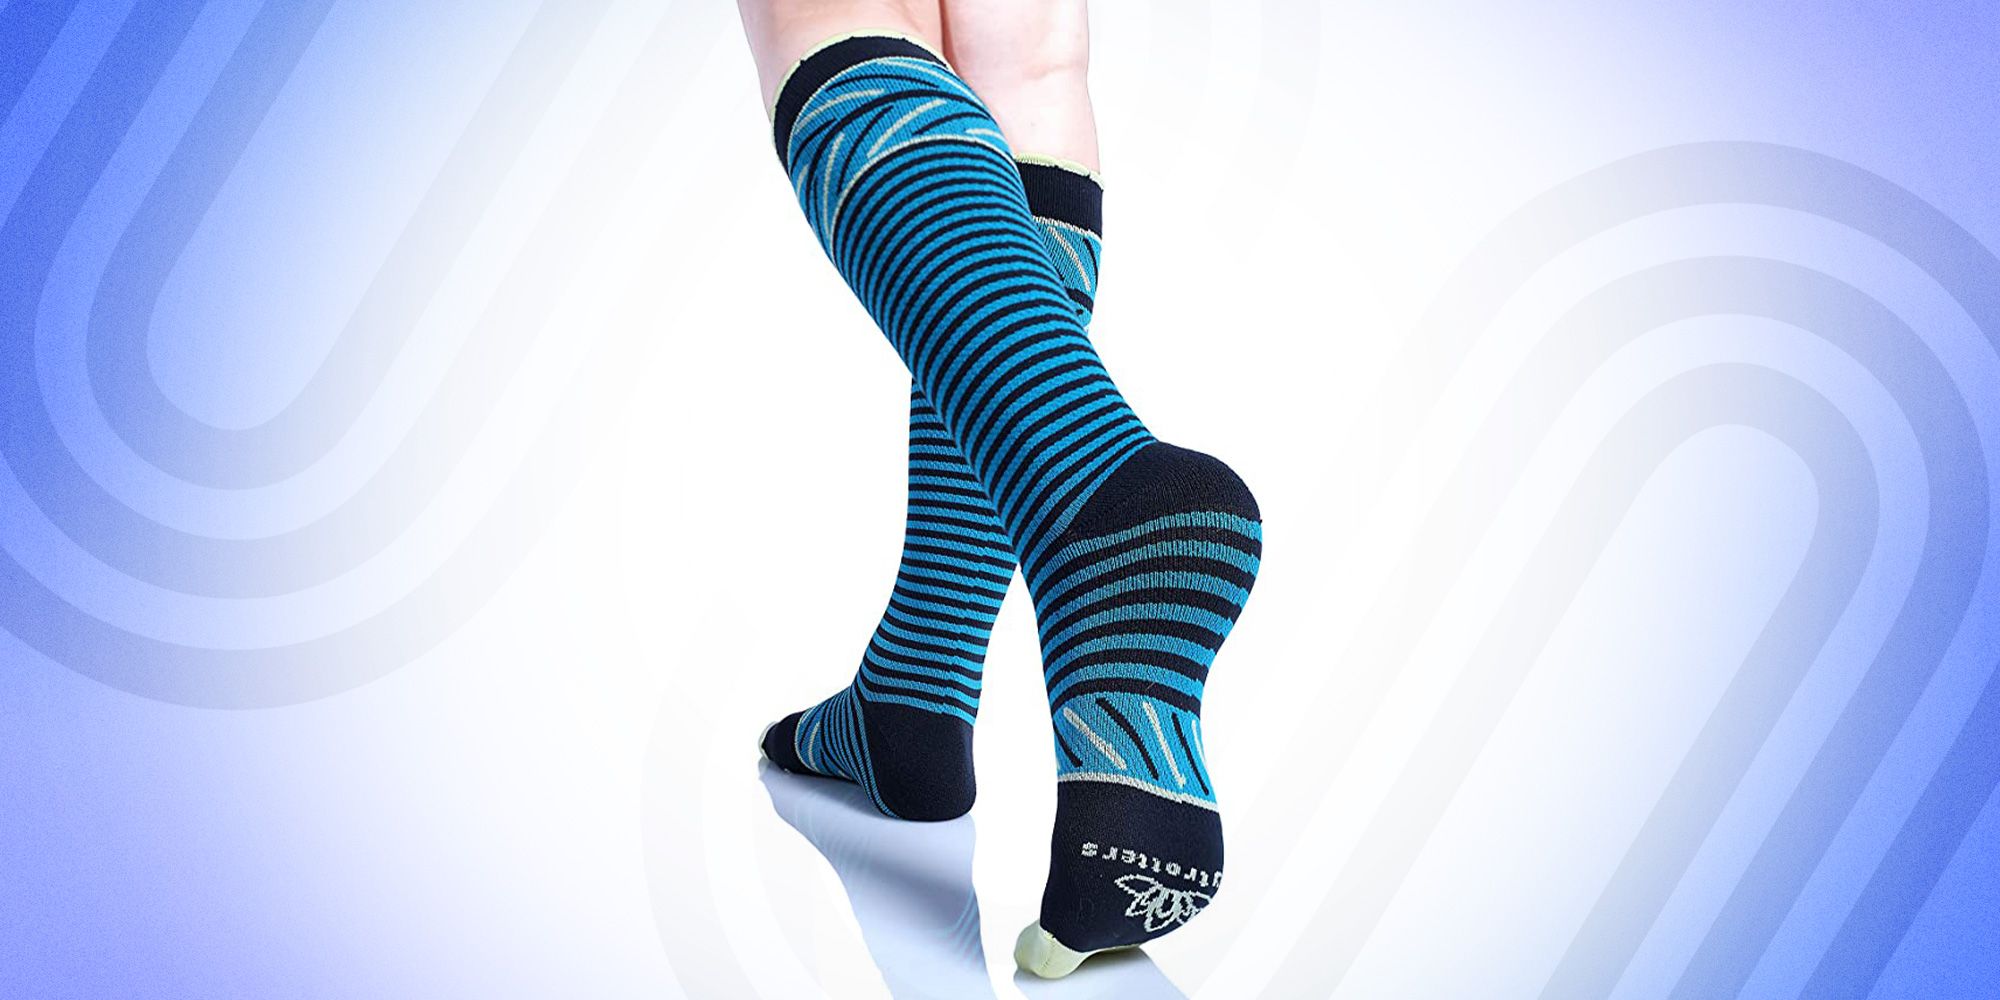 Athletic and Medical Socks for Running,Circulation,Recovery Compression Socks